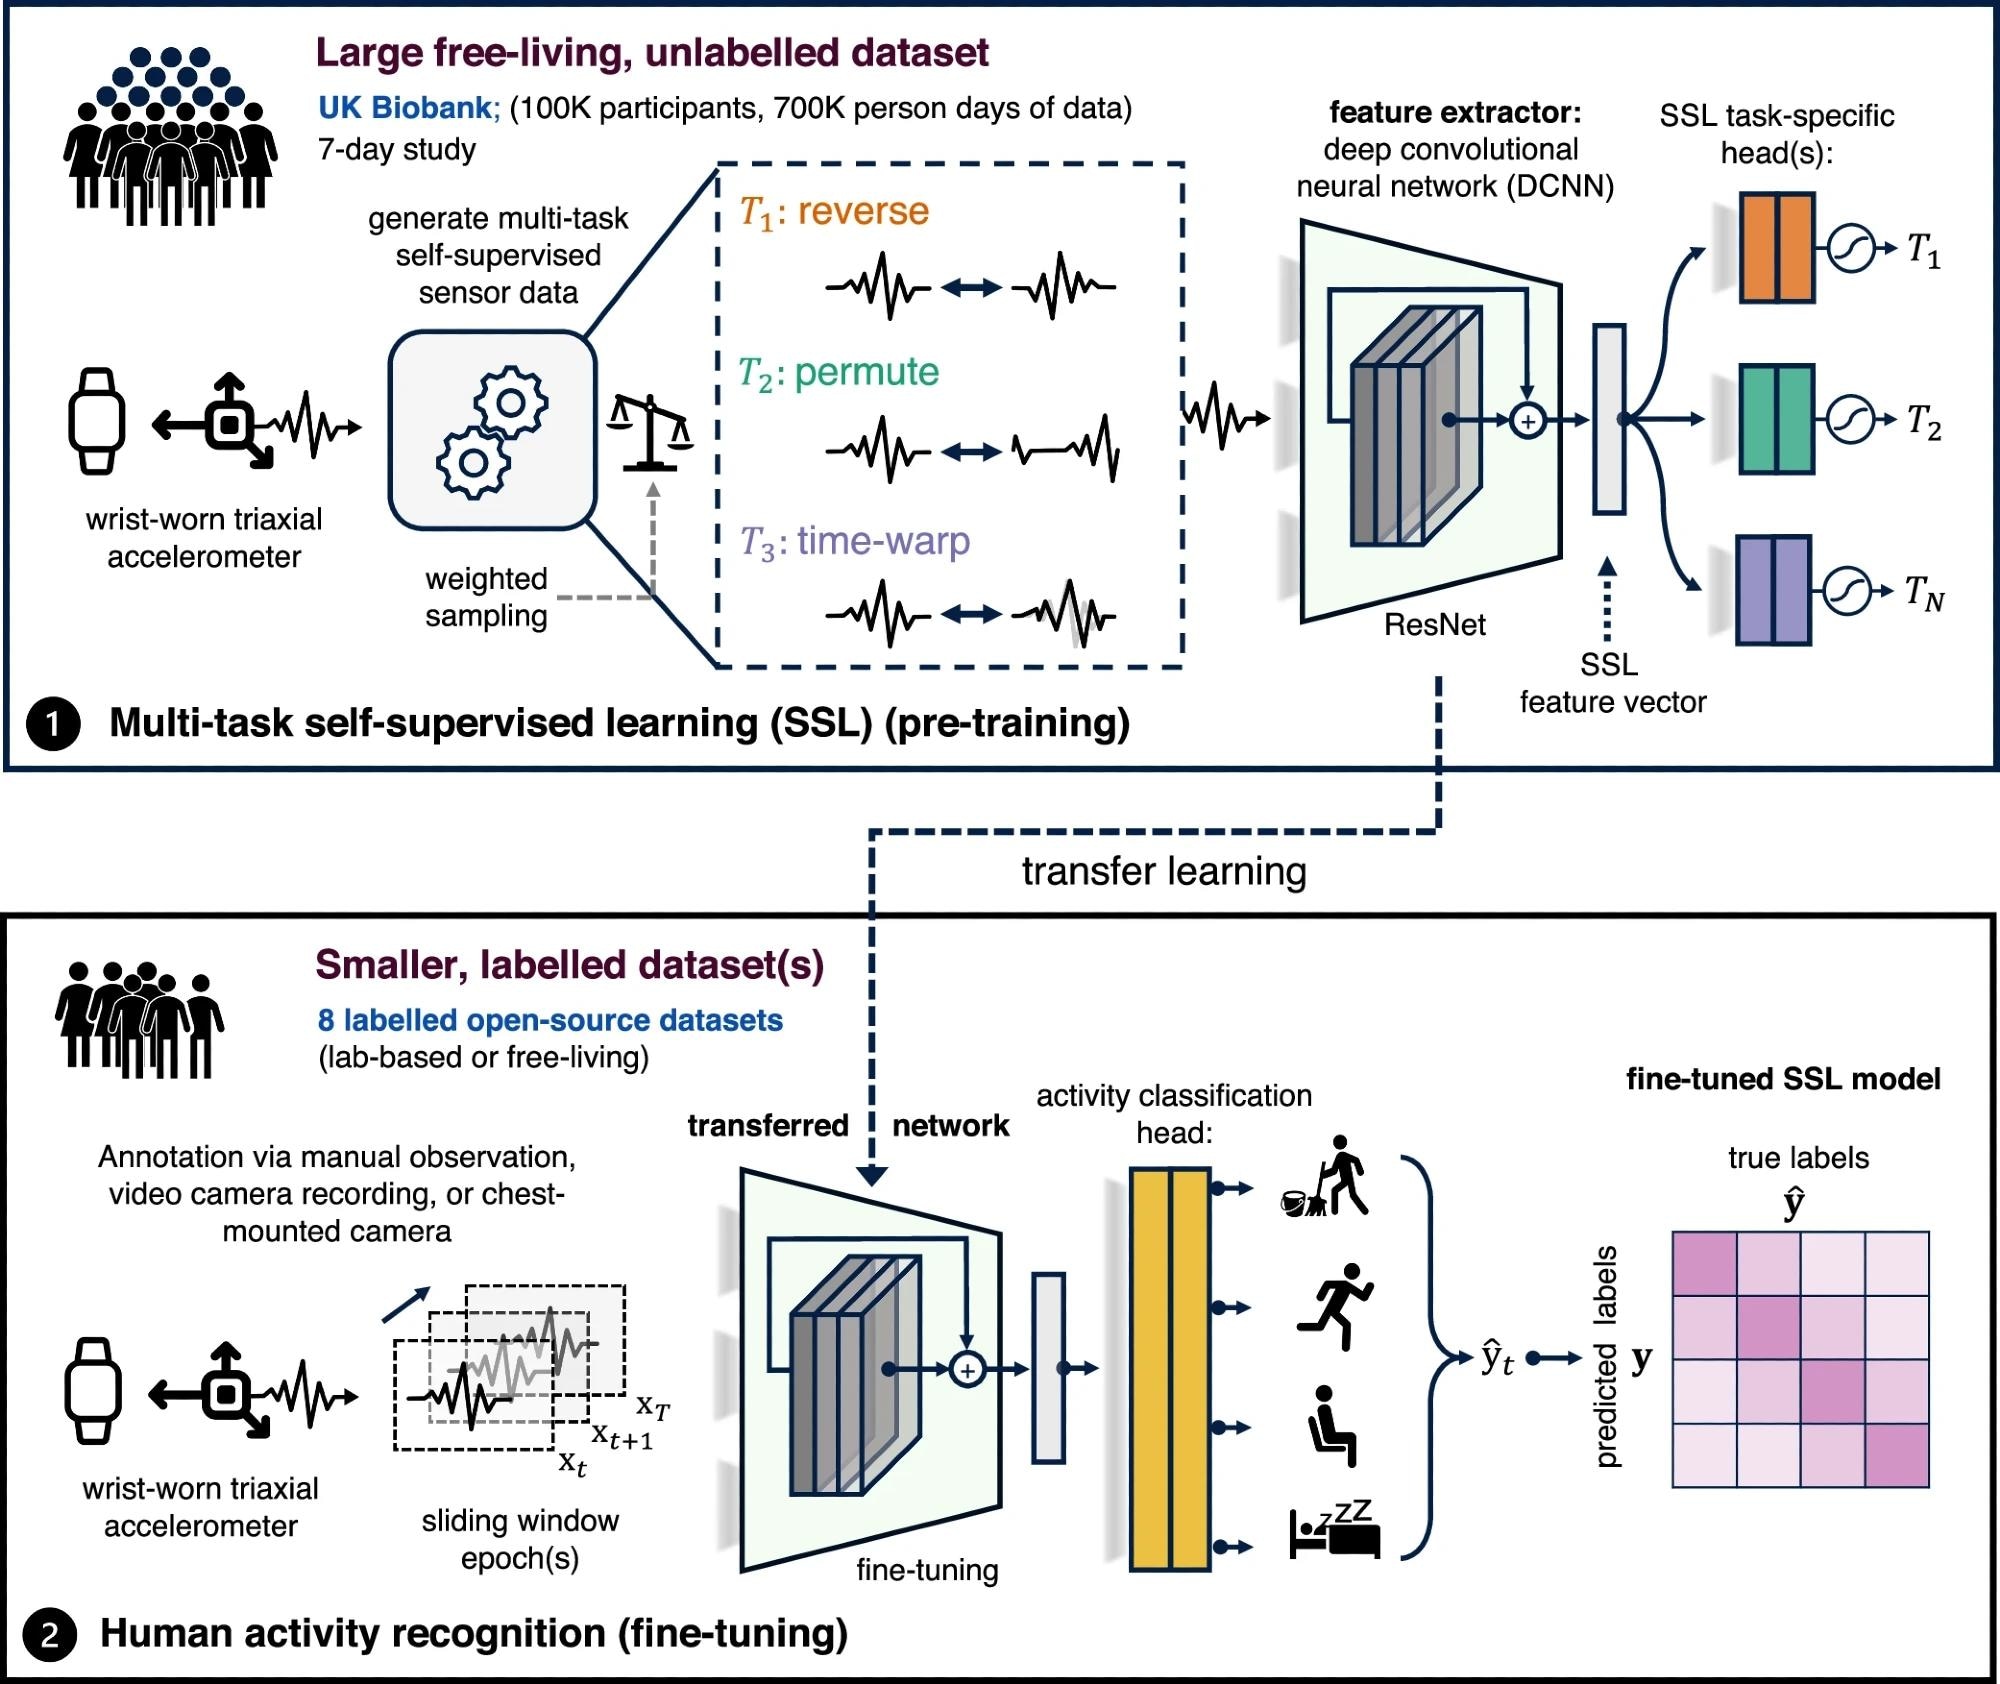 Step 1 involves multi-task self-supervised learning on 700,000 person-days of data from the UK Biobank. In step 2, we evaluate the utility of the pre-trained network in eight benchmark human activity recognition baselines via transfer learning.